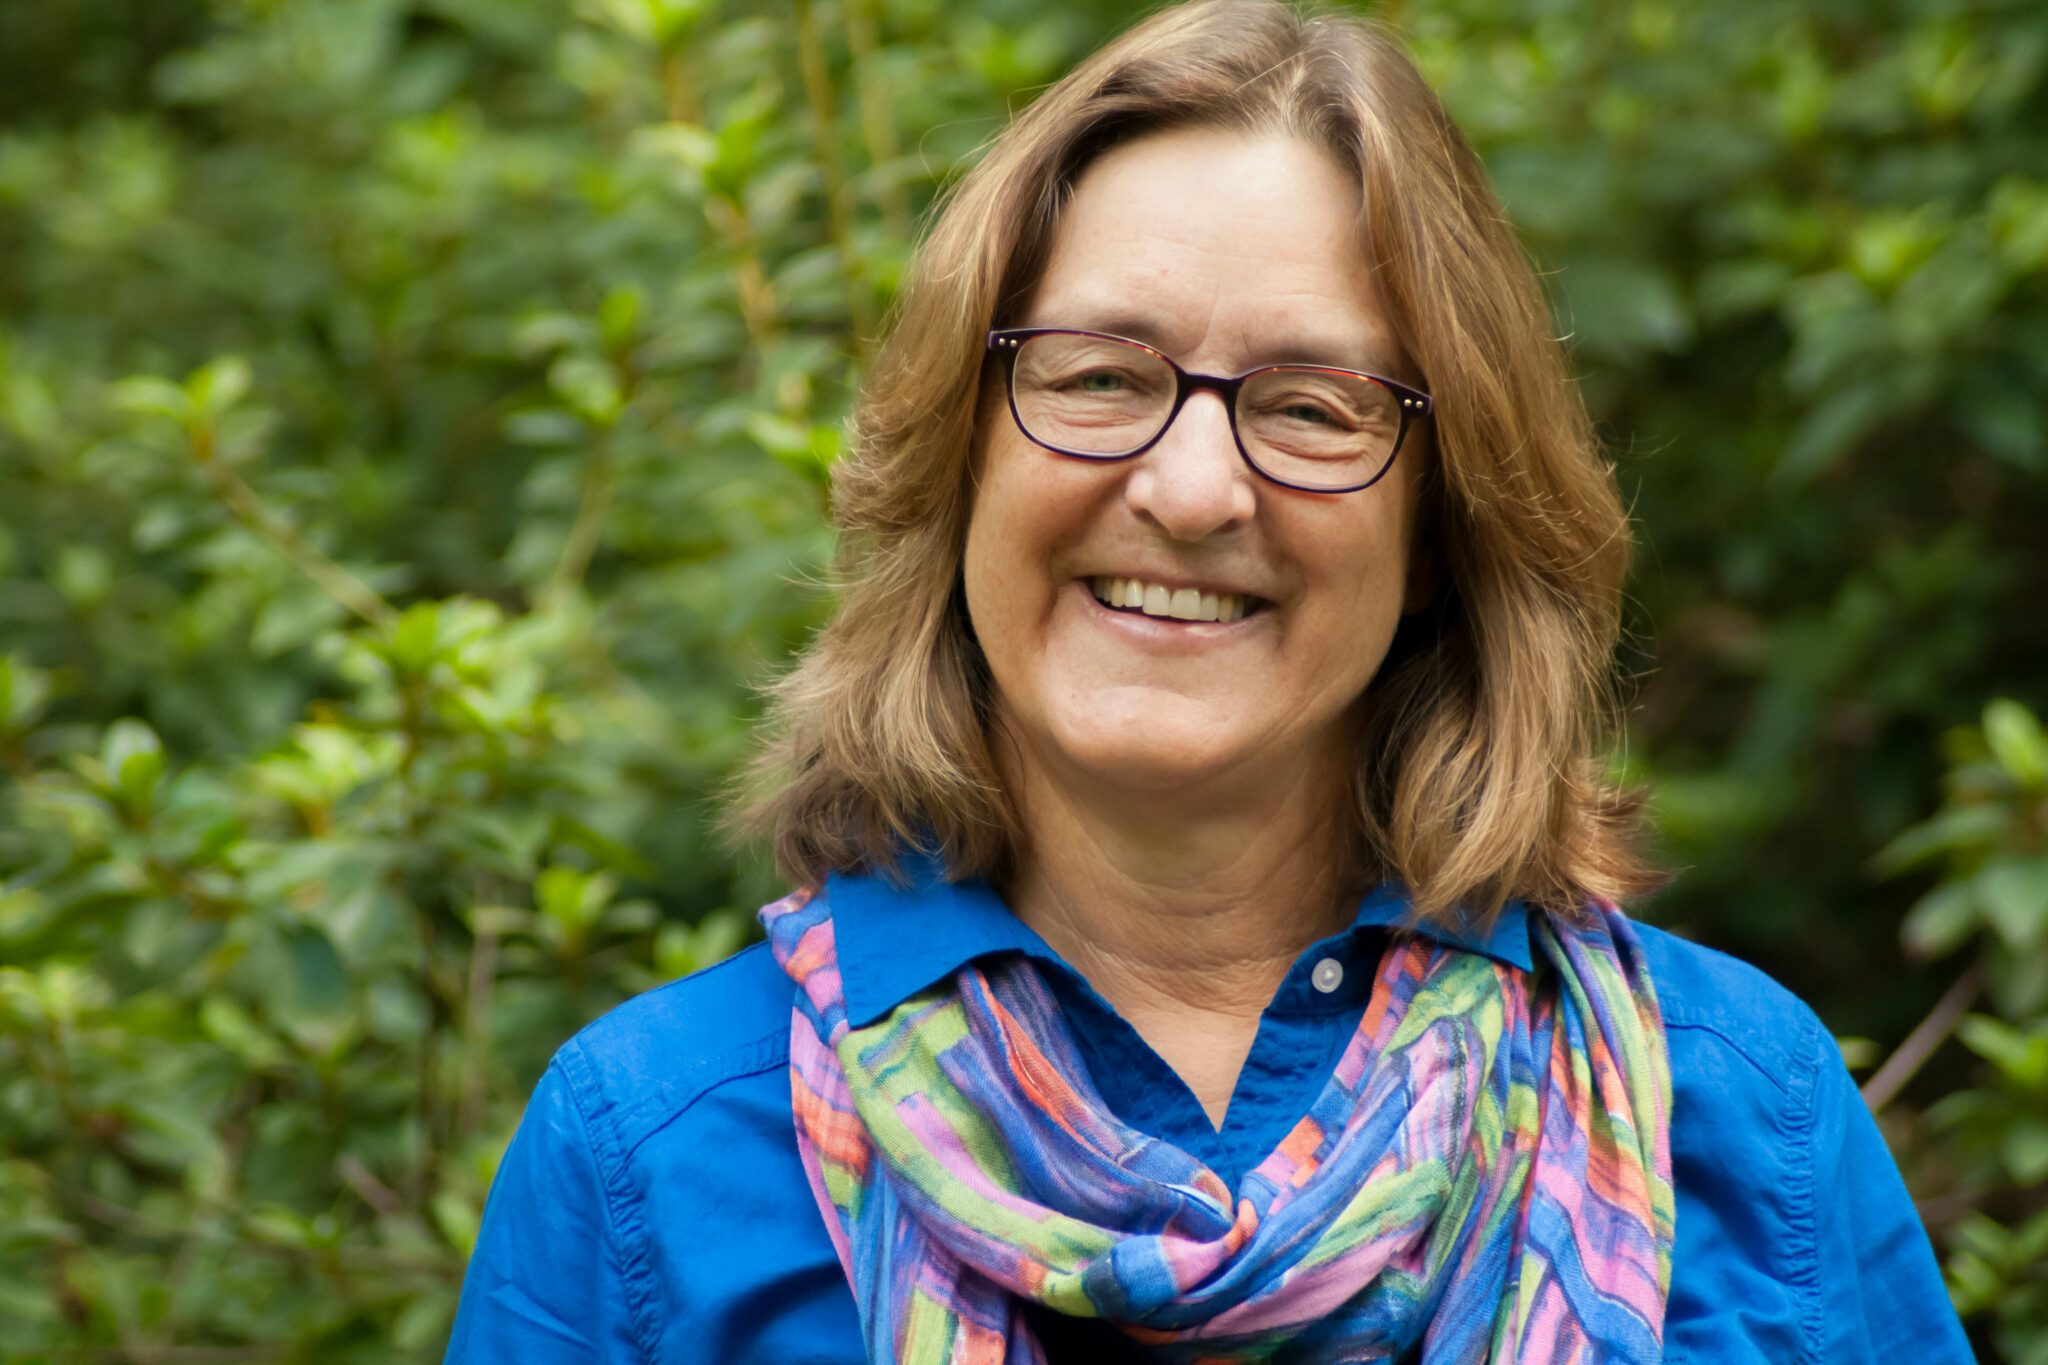 Nationally known writer and naturalist Susan Cerulean will appear virtually at Saint Leo University on Thursday, March 4, at 7 p.m.